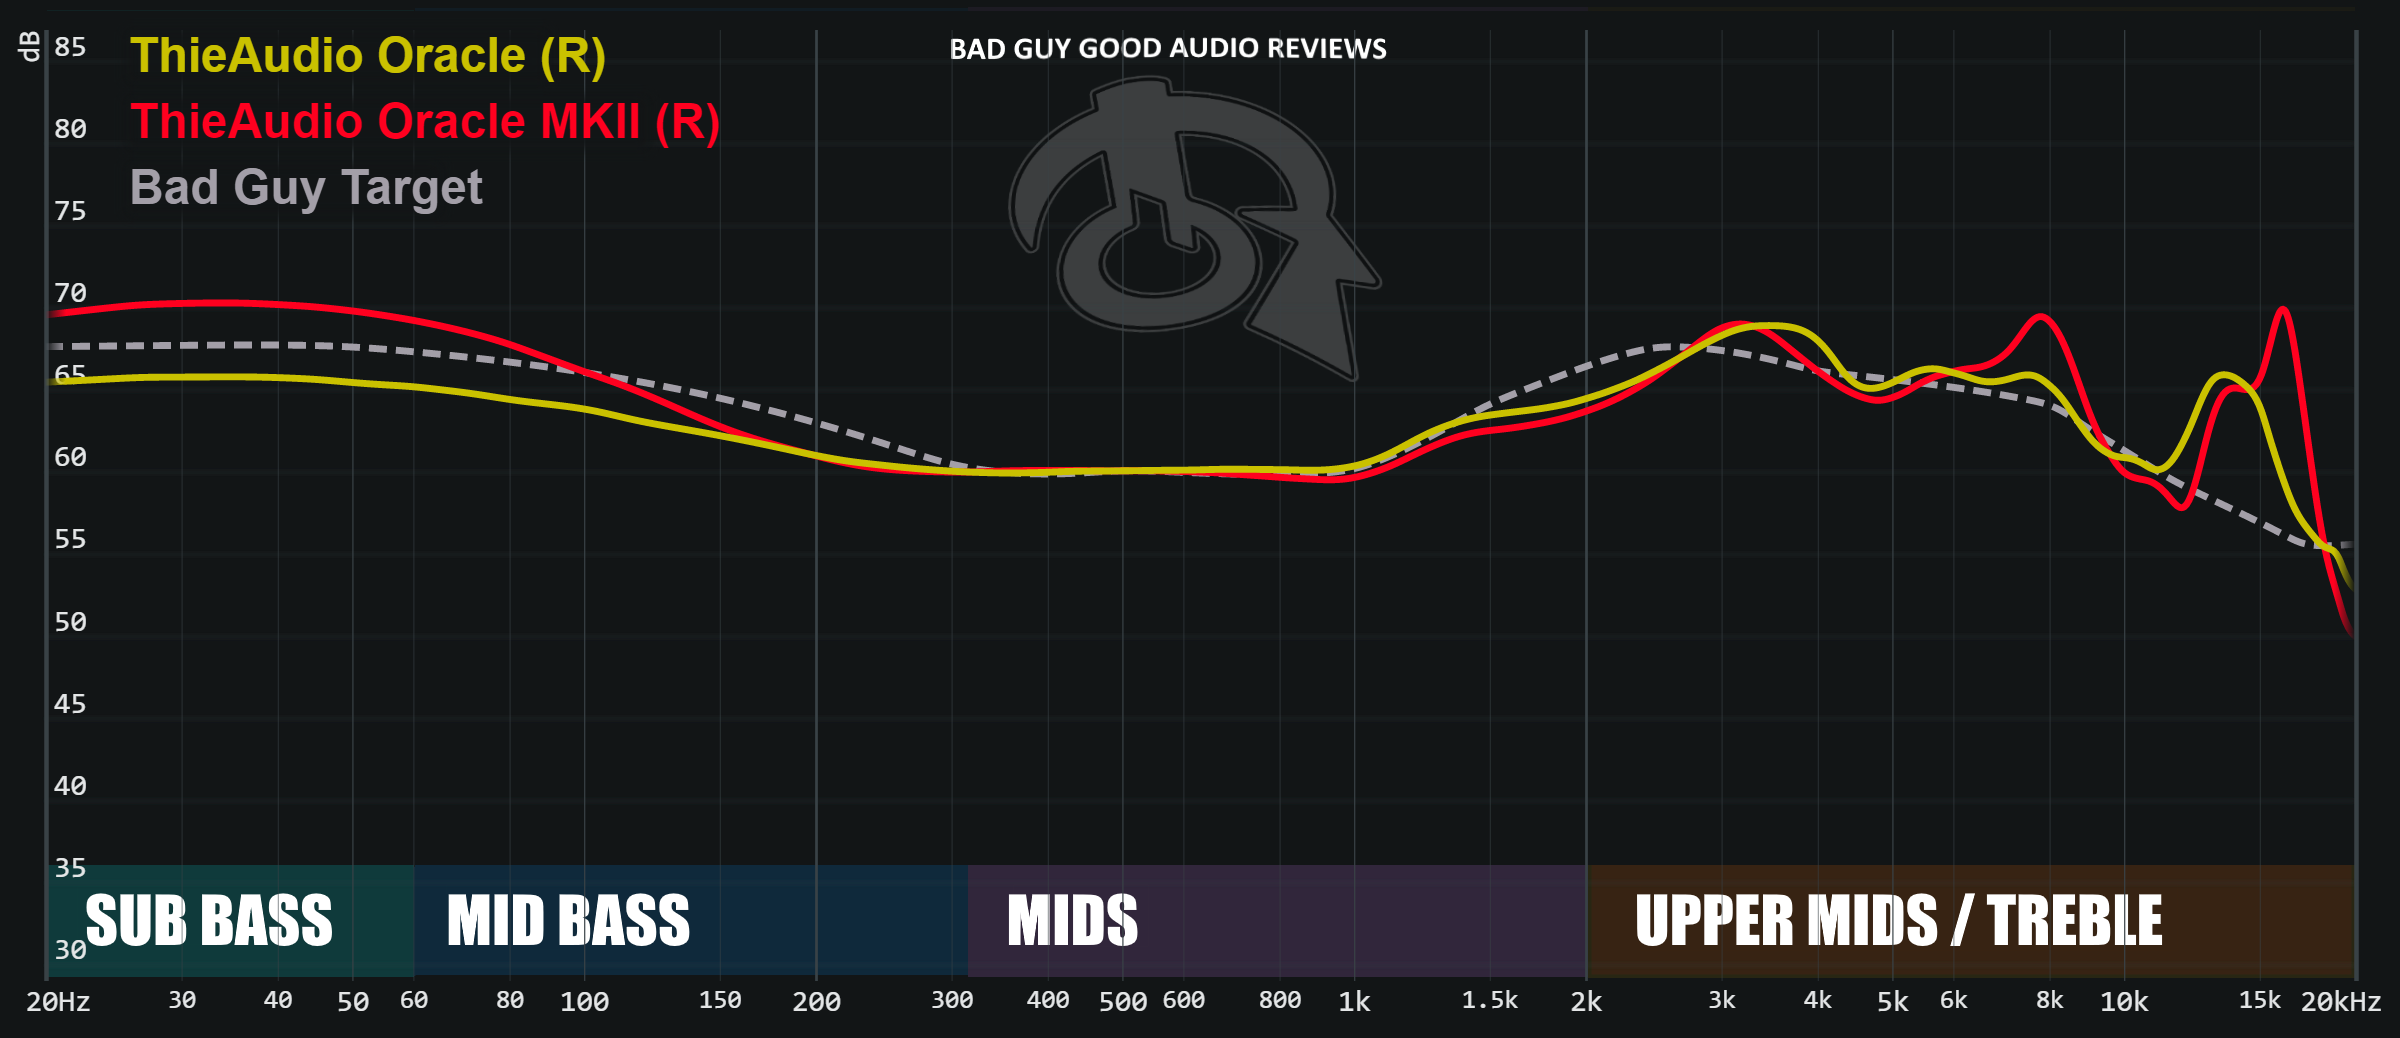 Bad Guy Good Audio Rankings and stuff (under construction) (Part 1 